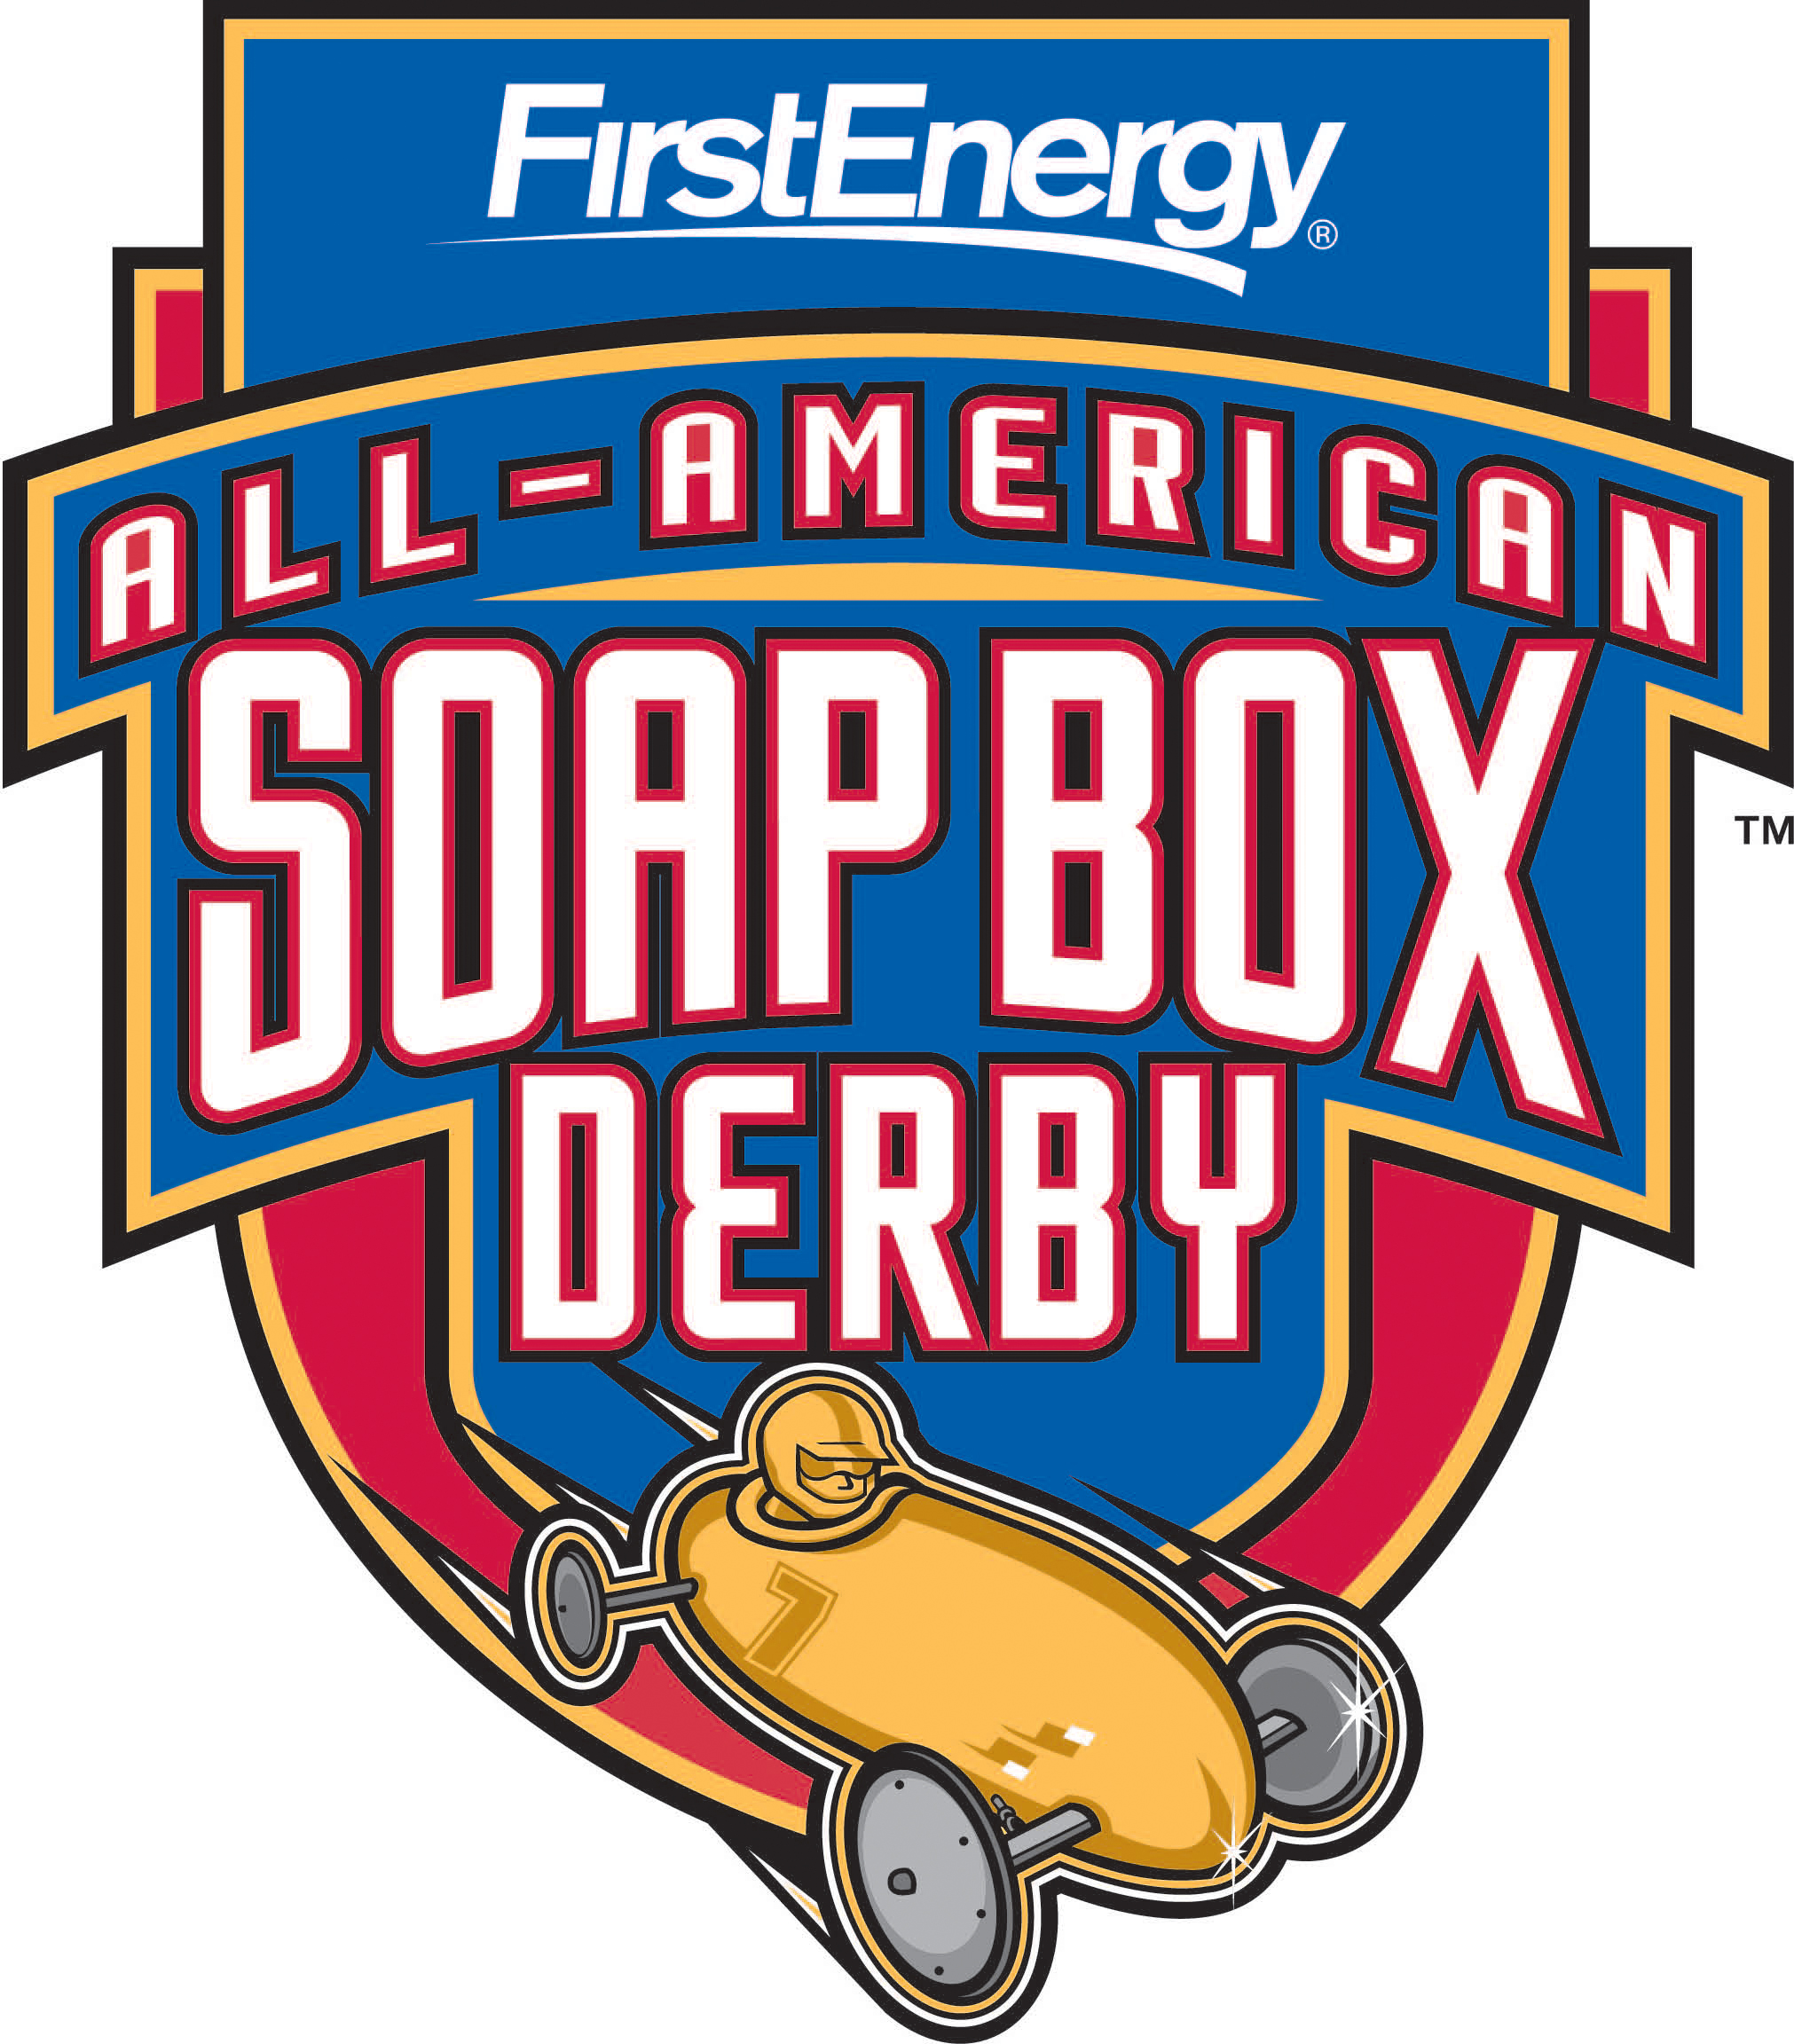 The International Soap Box Derby is a non-profit dedicated to building knowledge and character through collaboration and honest competition.